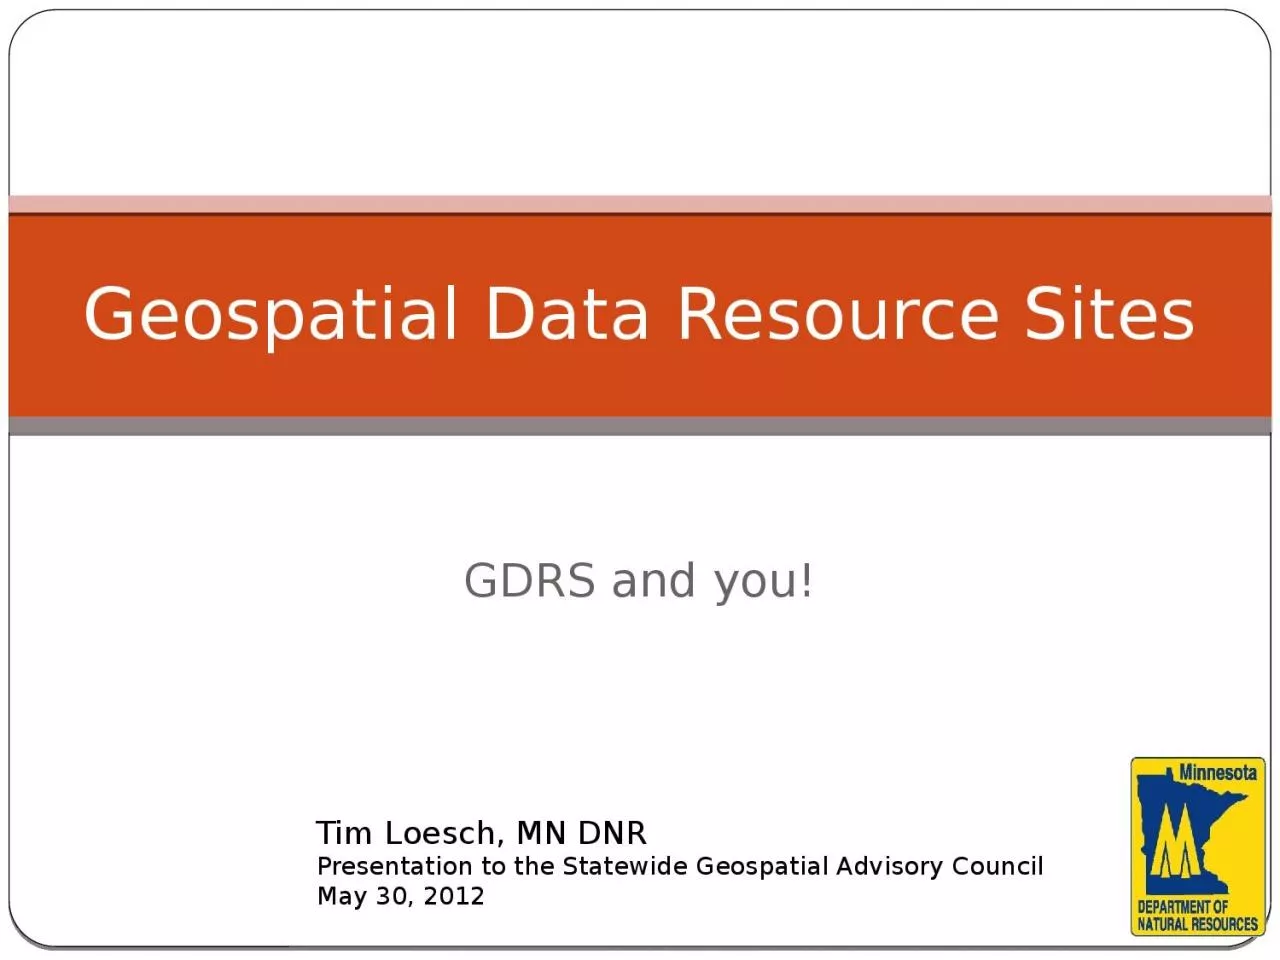 GDRS and you! Geospatial Data Resource Sites